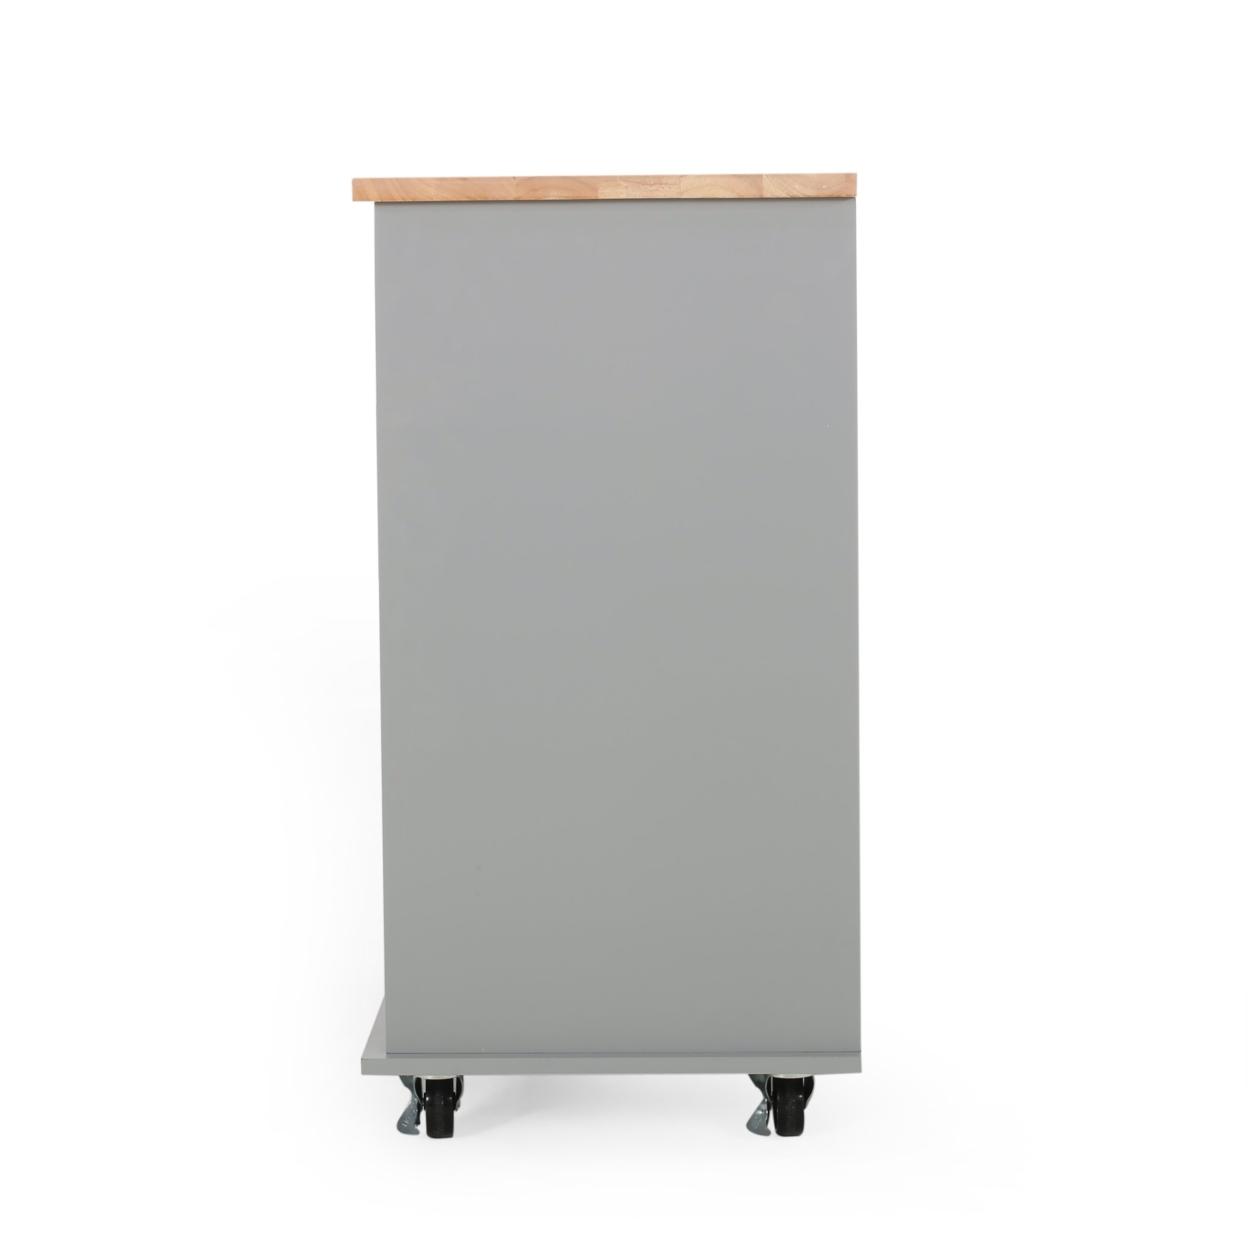 Yohaan Contemporary Kitchen Cart With Wheels - Gray/natural